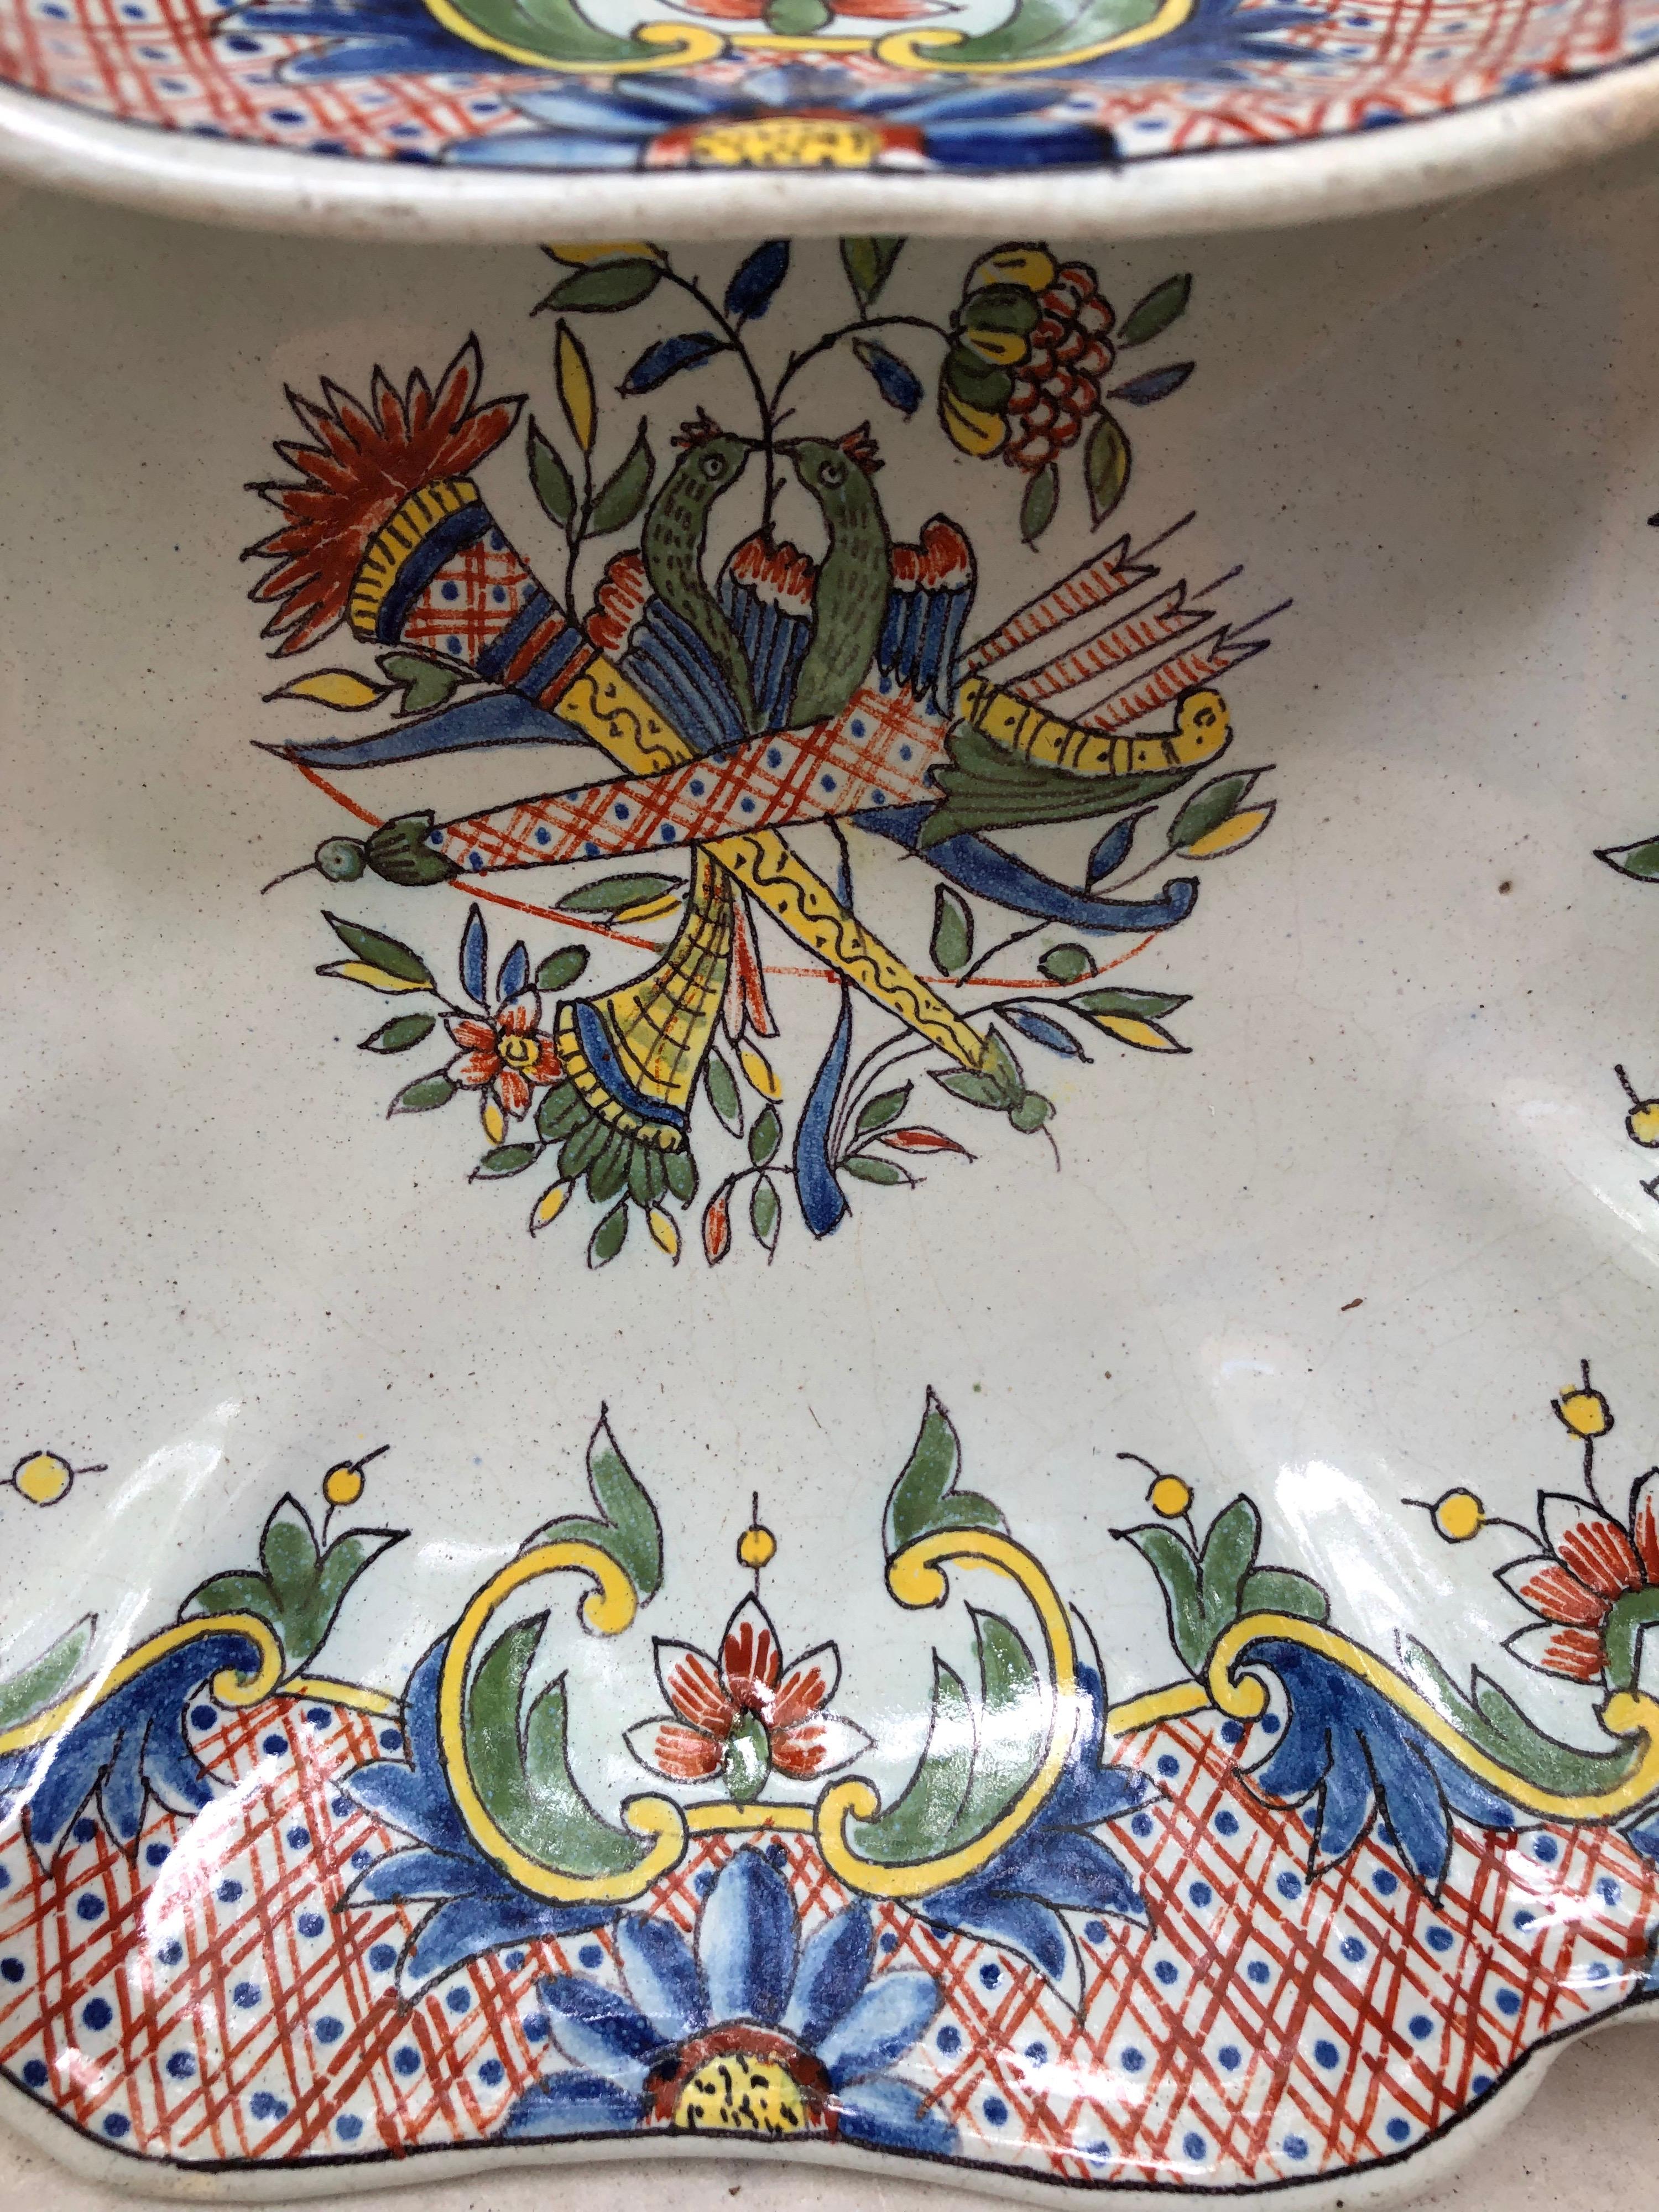 Very colorful French Faience platter desvres Circa 1890.
2 birds on the middle of a quiver.